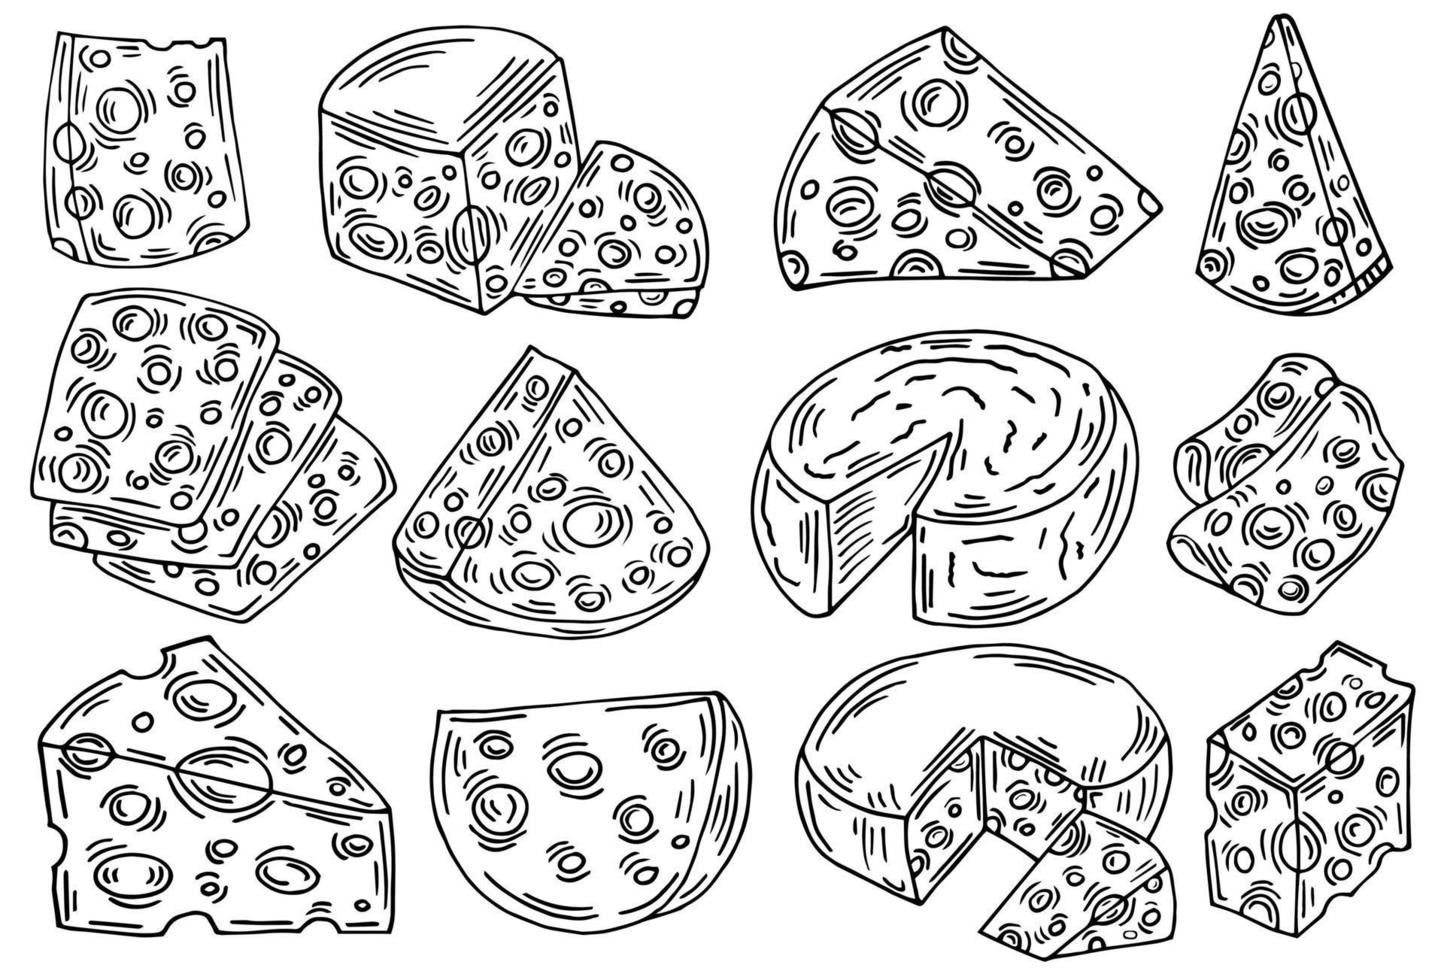 Cheese organic dairy butter fresh food vector hand drawn illustration set